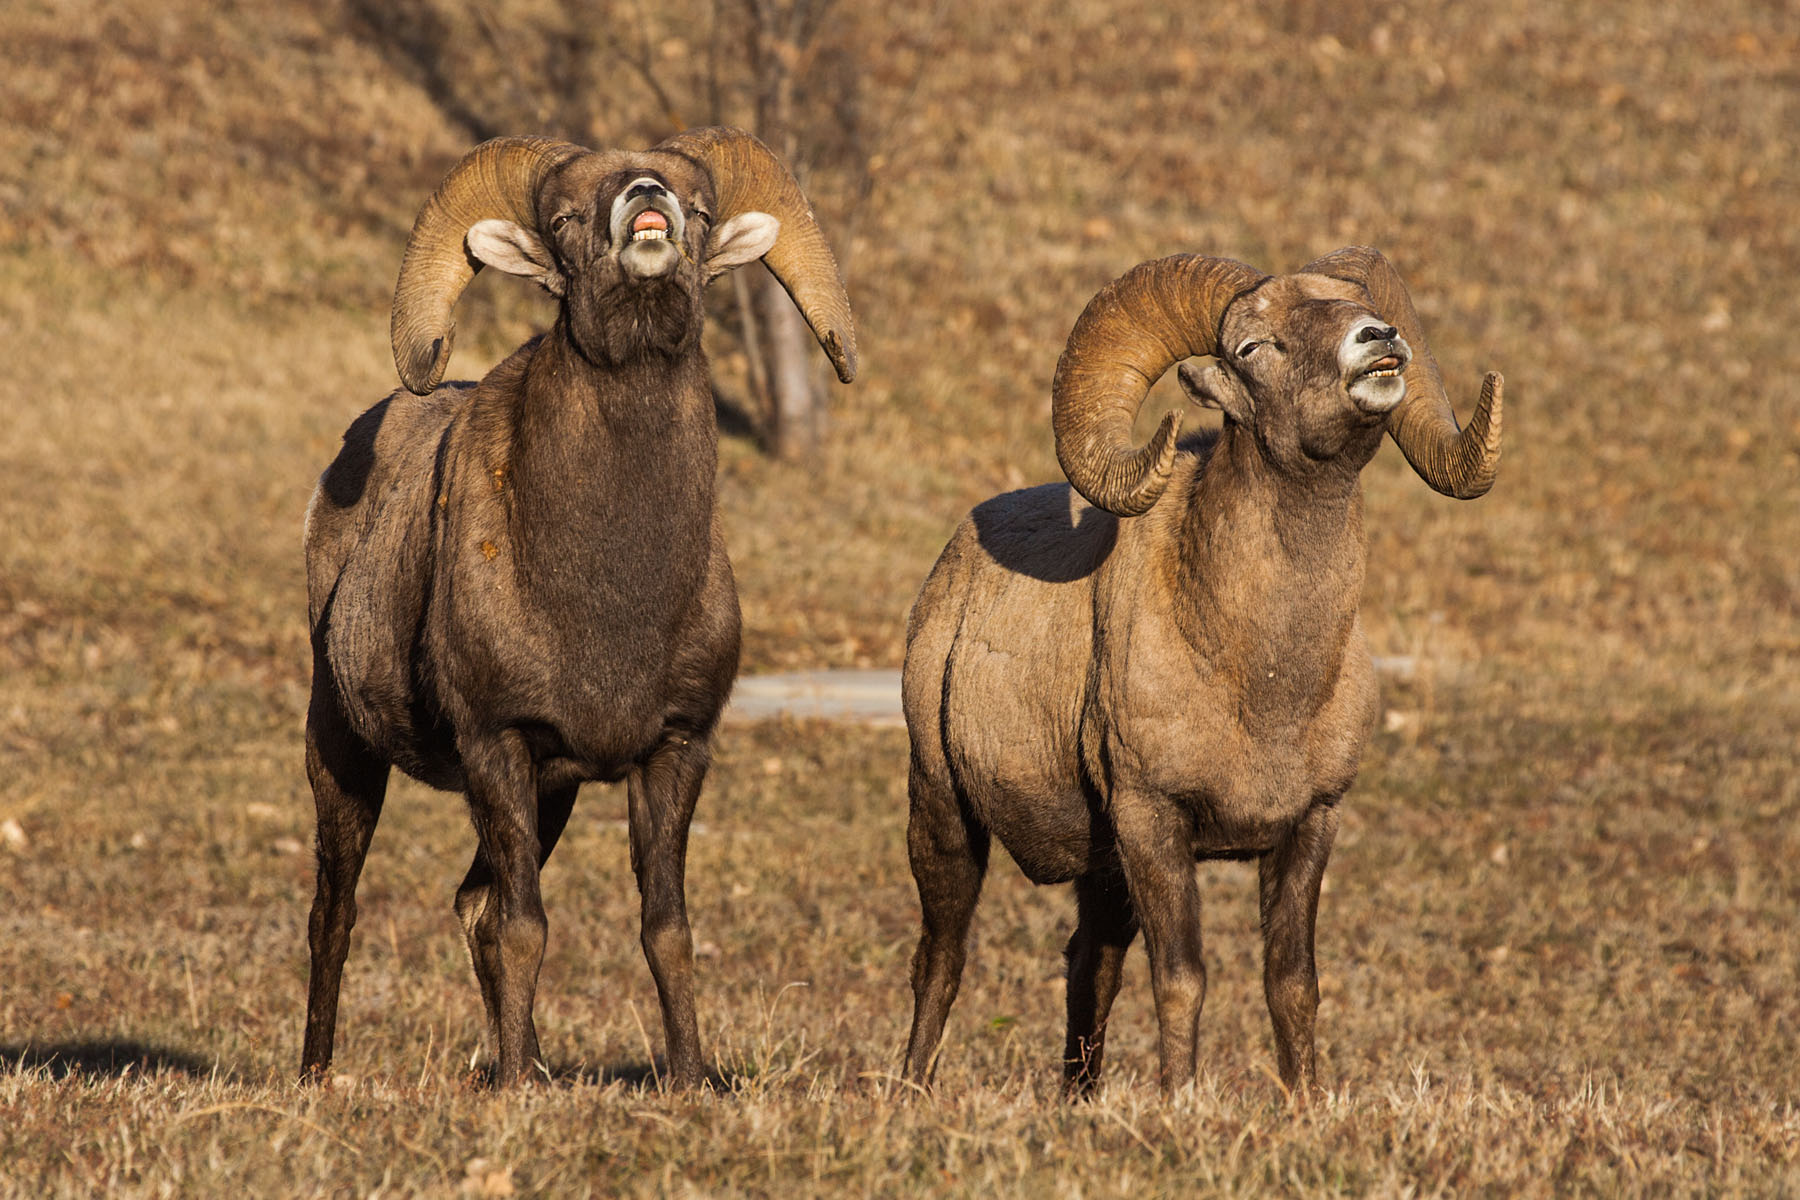 Rocky Mountain Bighorns rams showing mating behavior, Cleghorn Springs State Fish Hatchery, Rapid City.  Click for next photo.